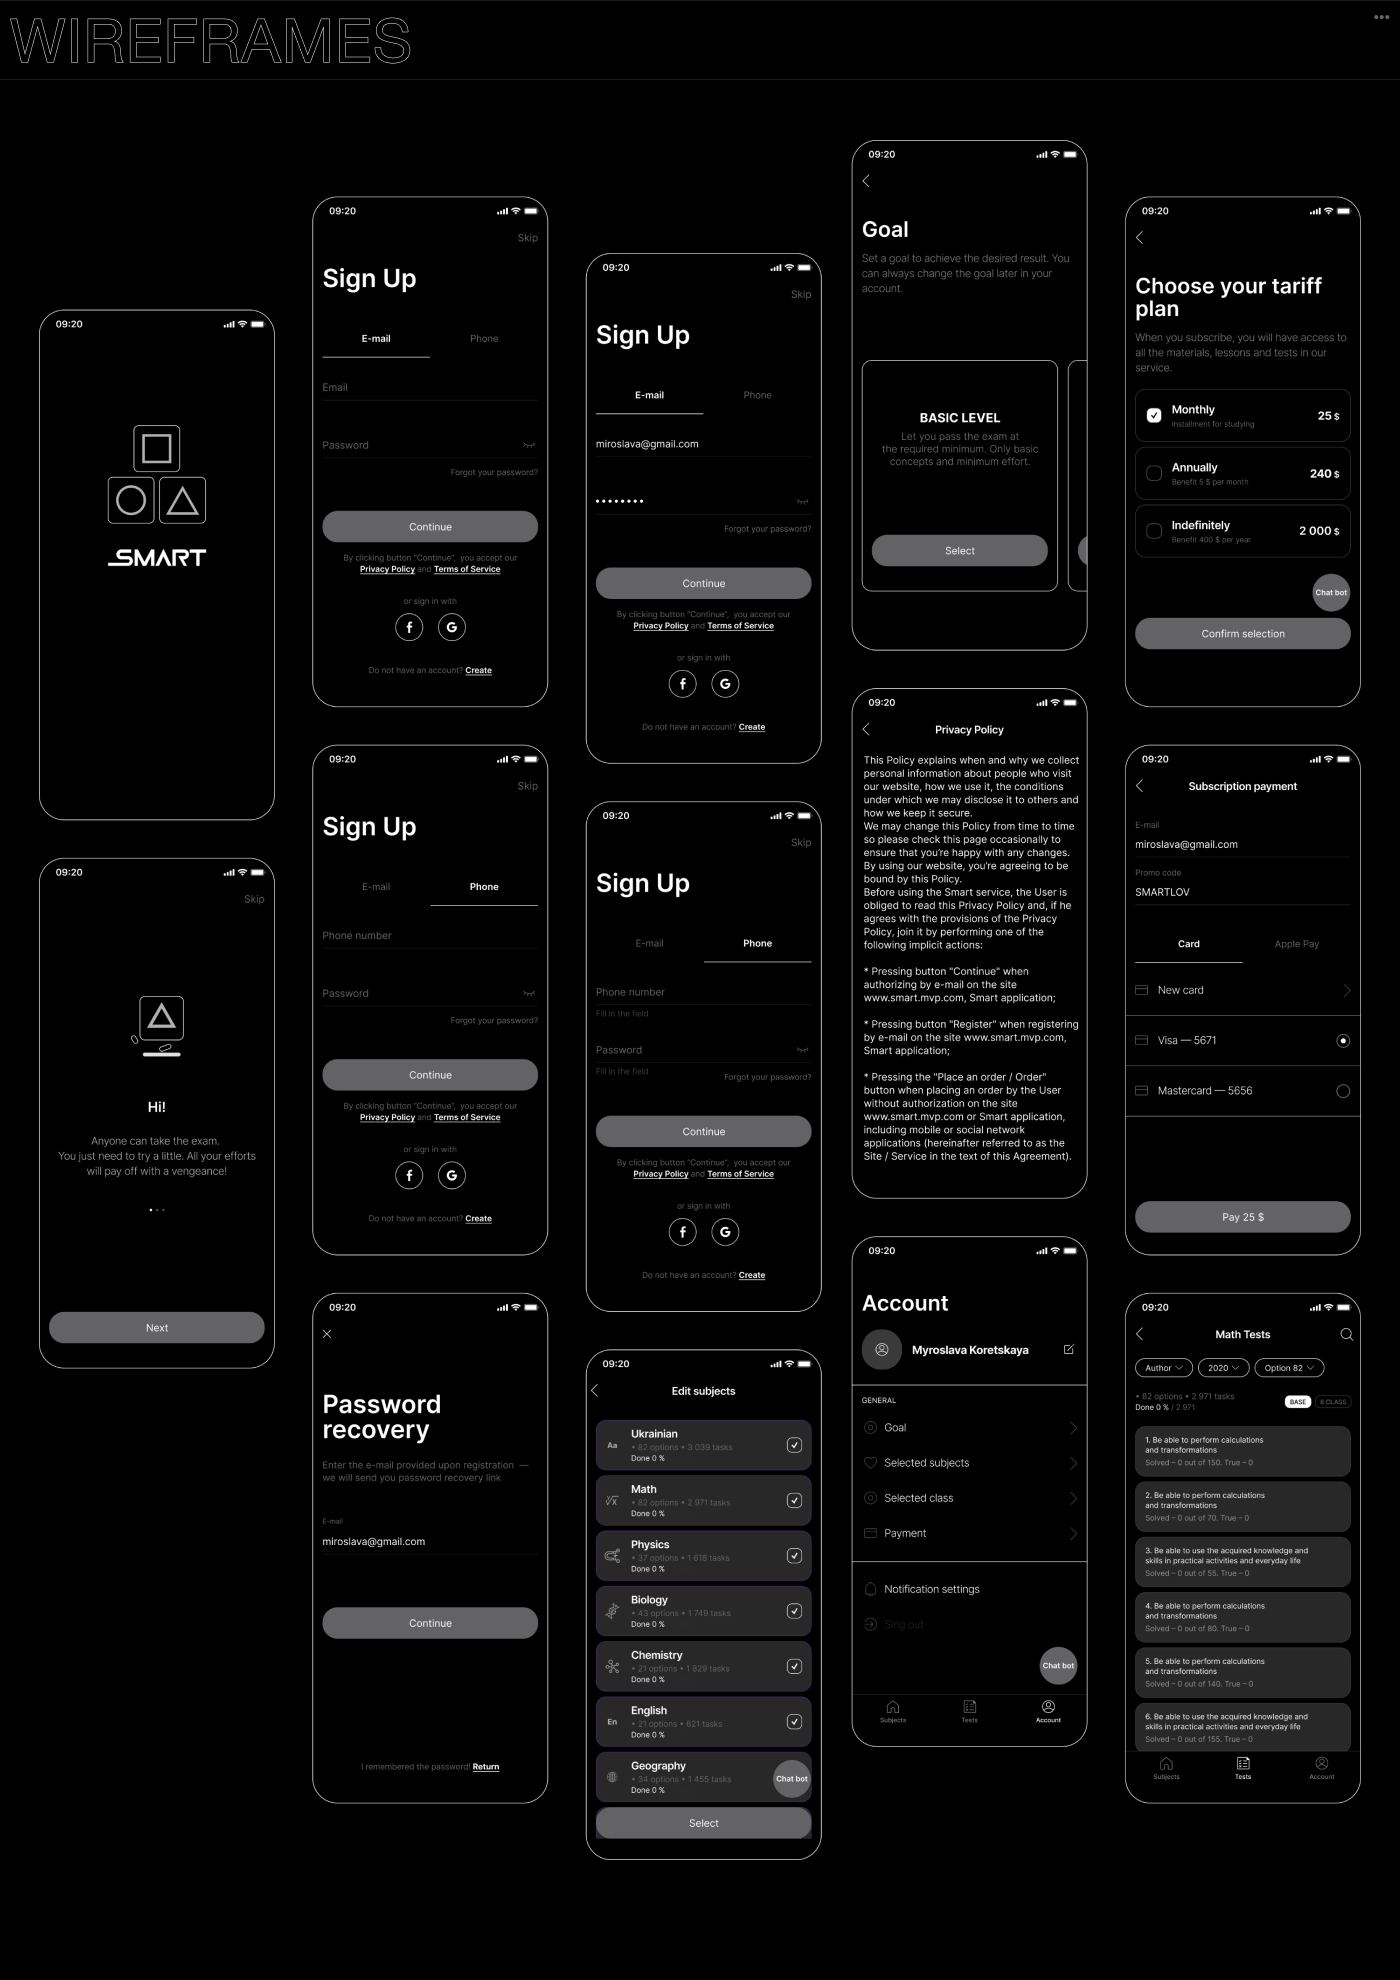 Wireframes to define the app's information architecture and user flow, identify usability issues